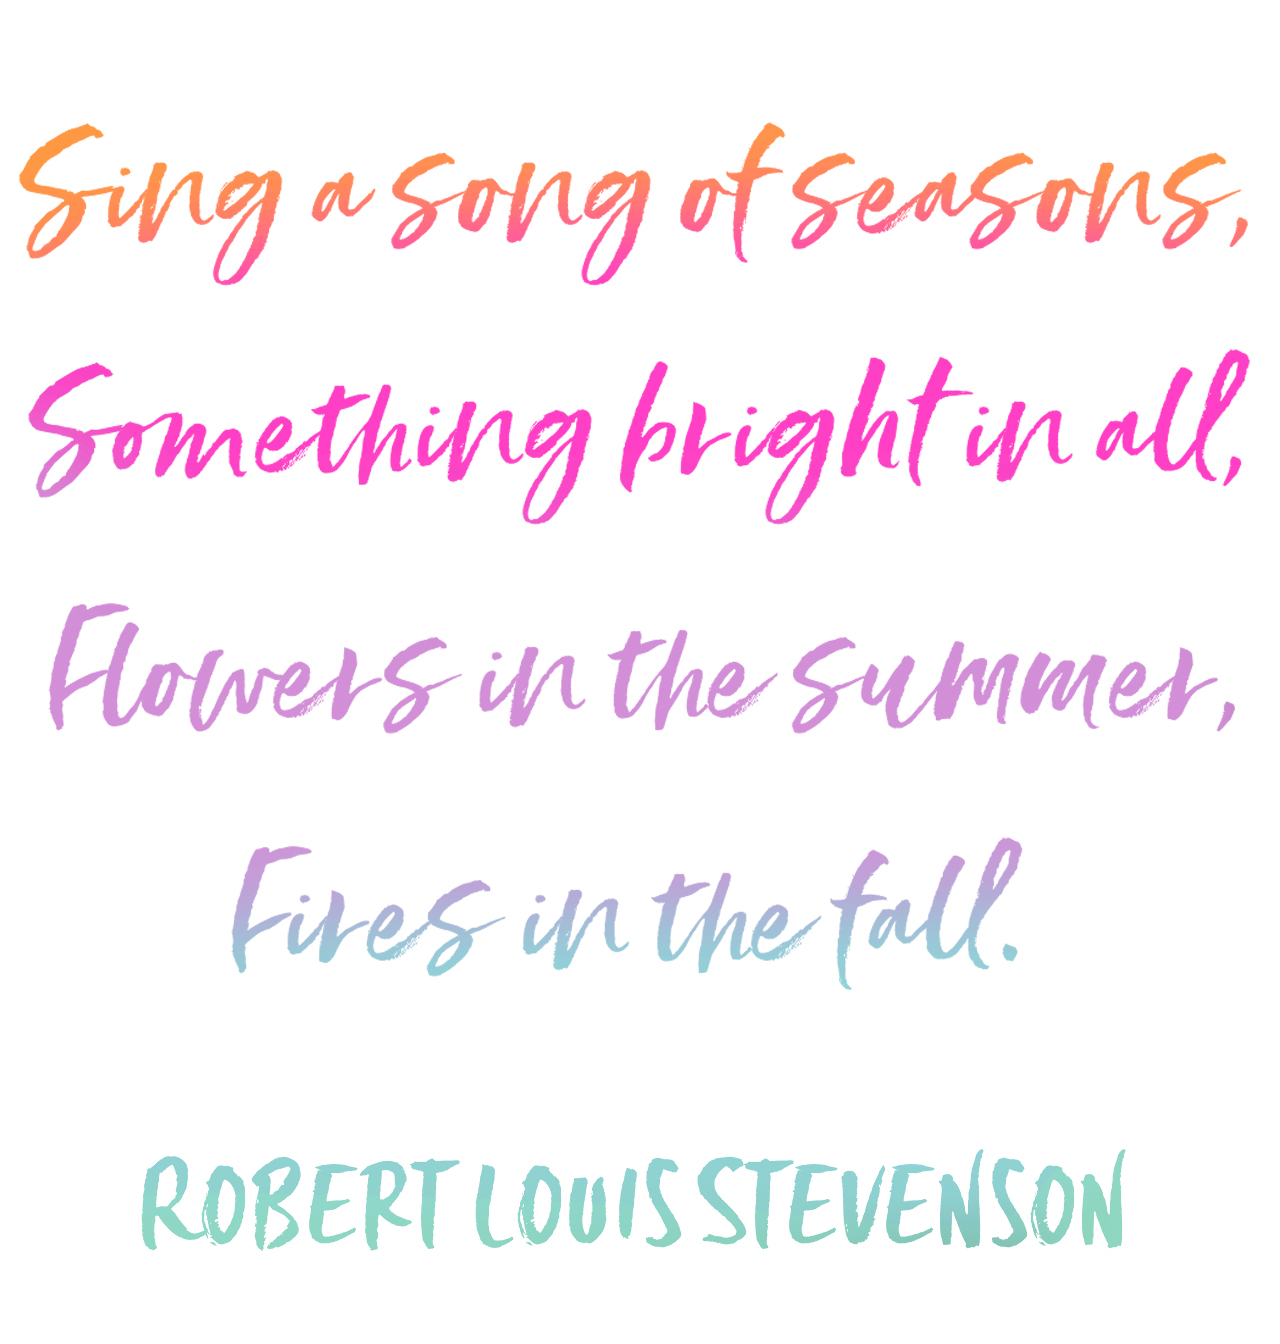 Robert Louis Stevenson quote in brush lettering font Styled Up